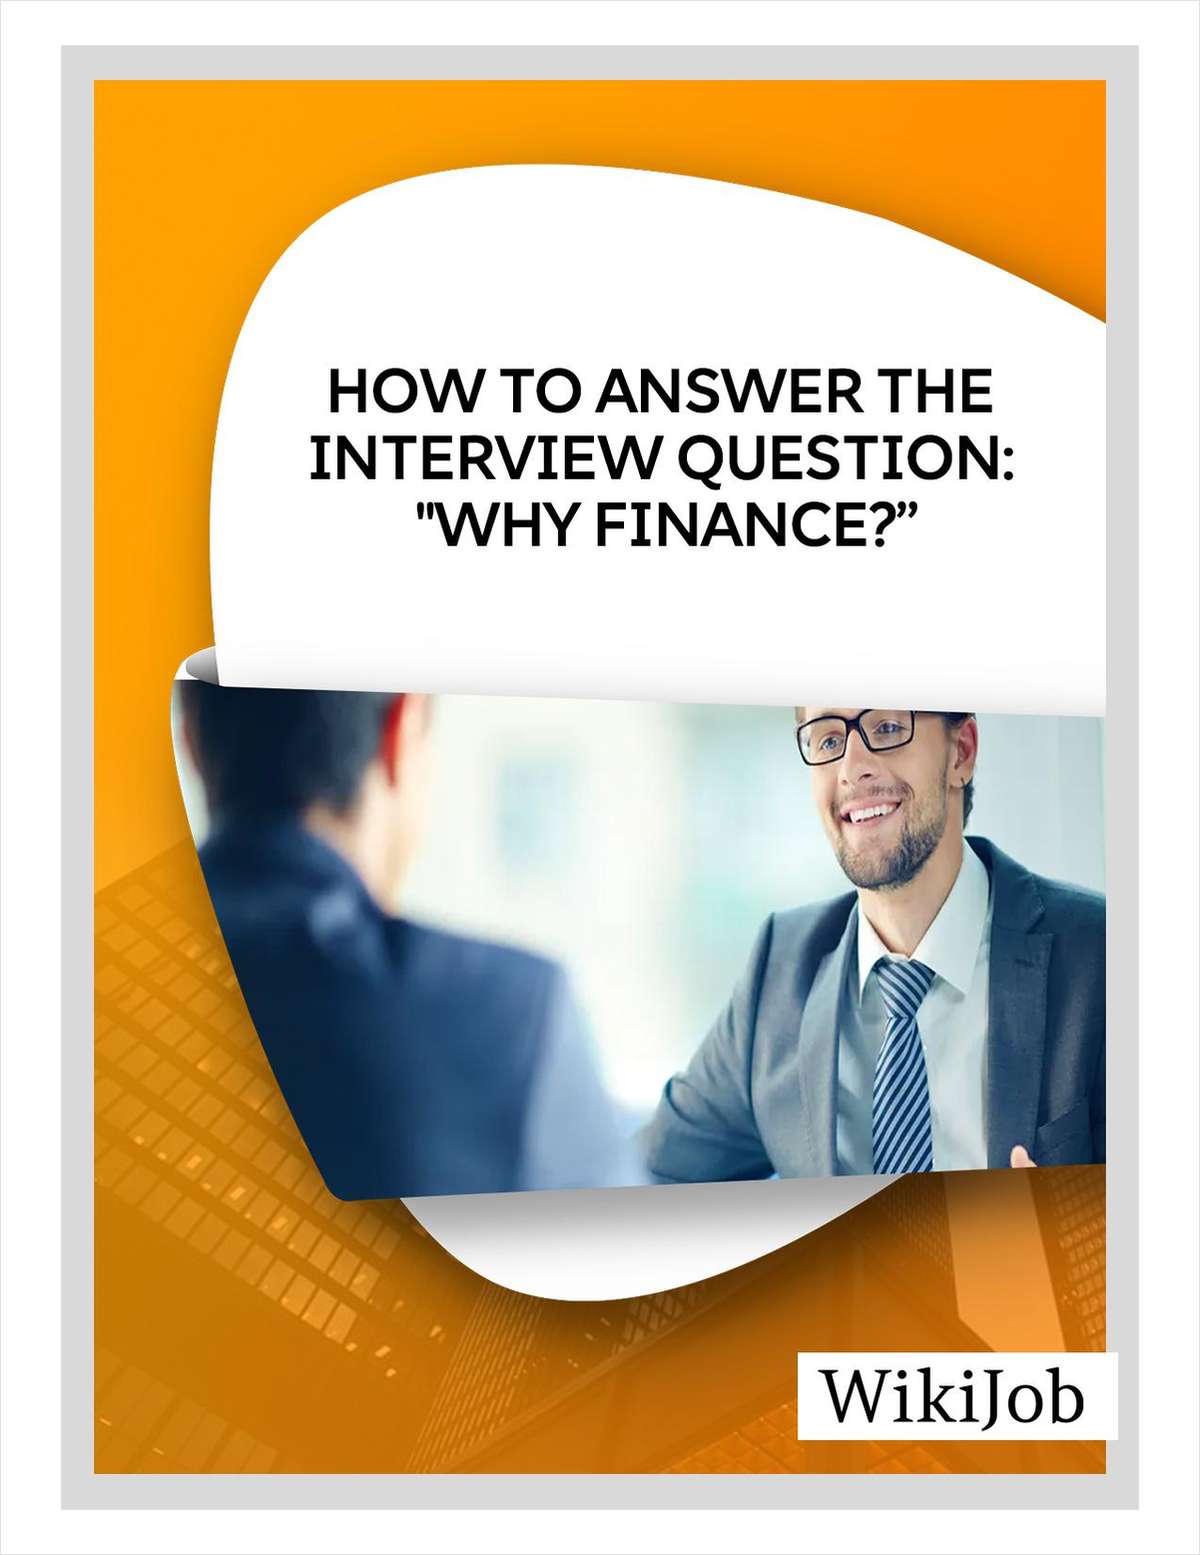 How to Answer the Interview Question: Why Finance?